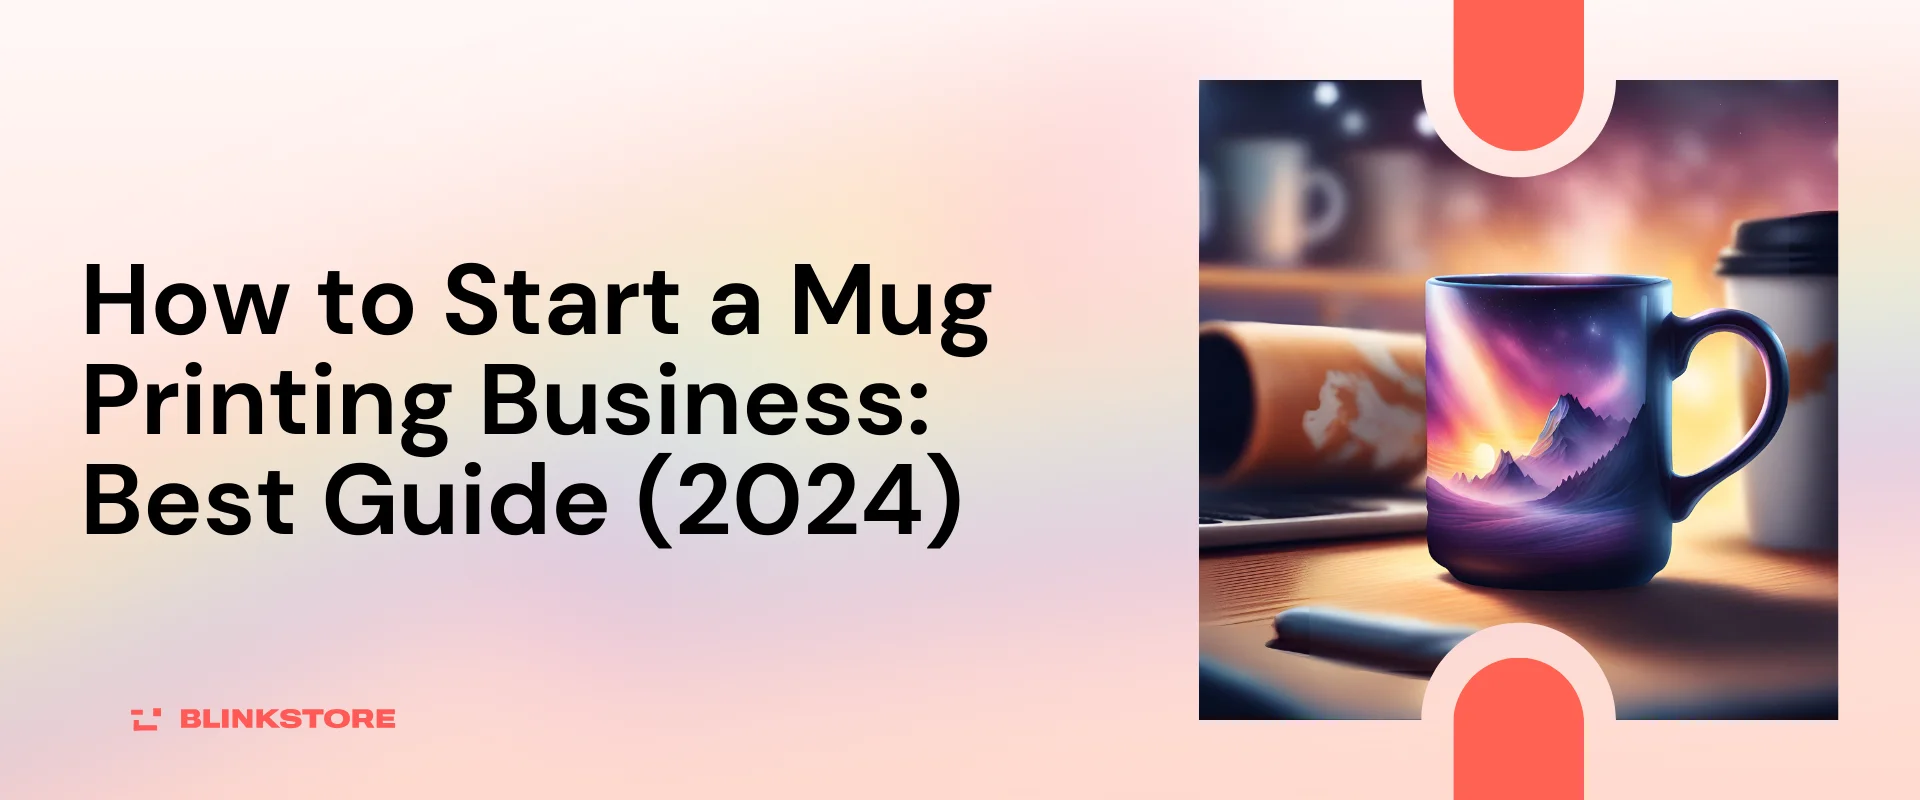 How to Start a Mug Printing Business: Best Guide (2024)